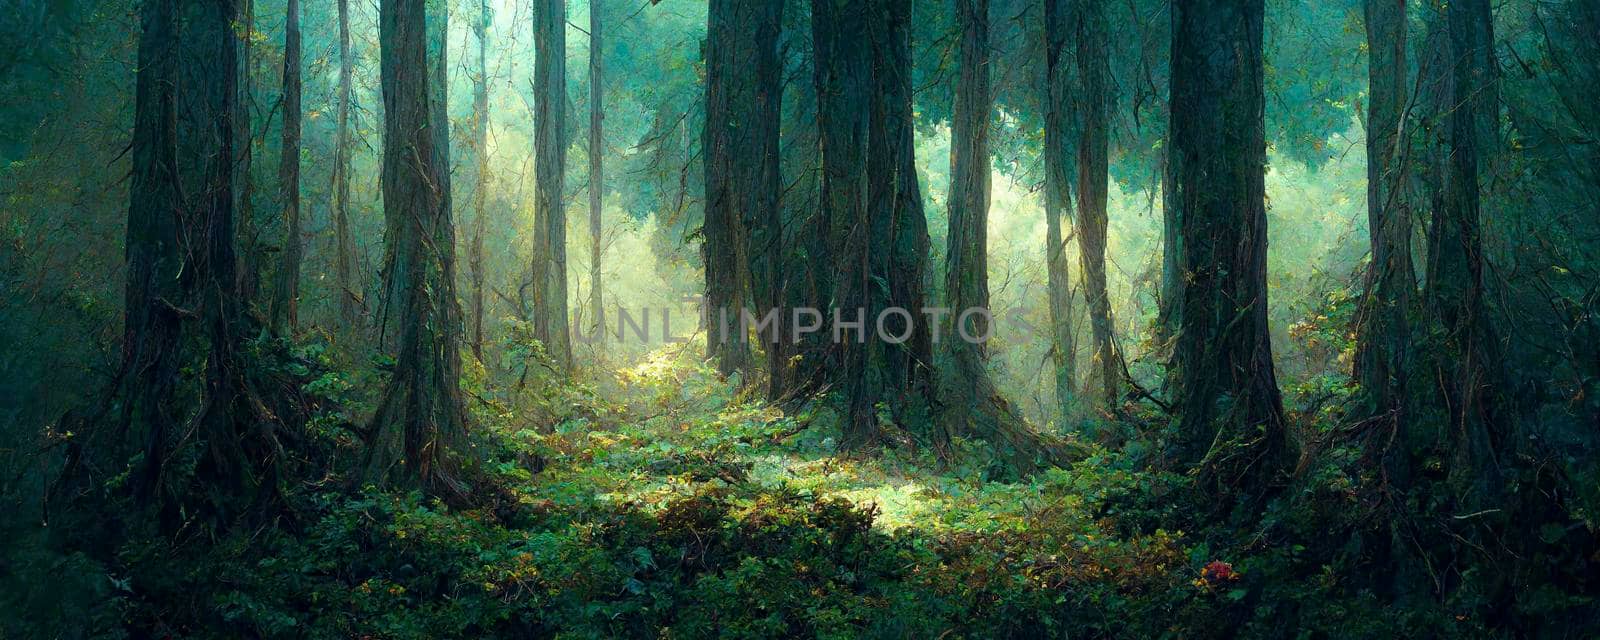 Lovely magic colored blurred foggy forest trees with illustrated abstract bokeh light